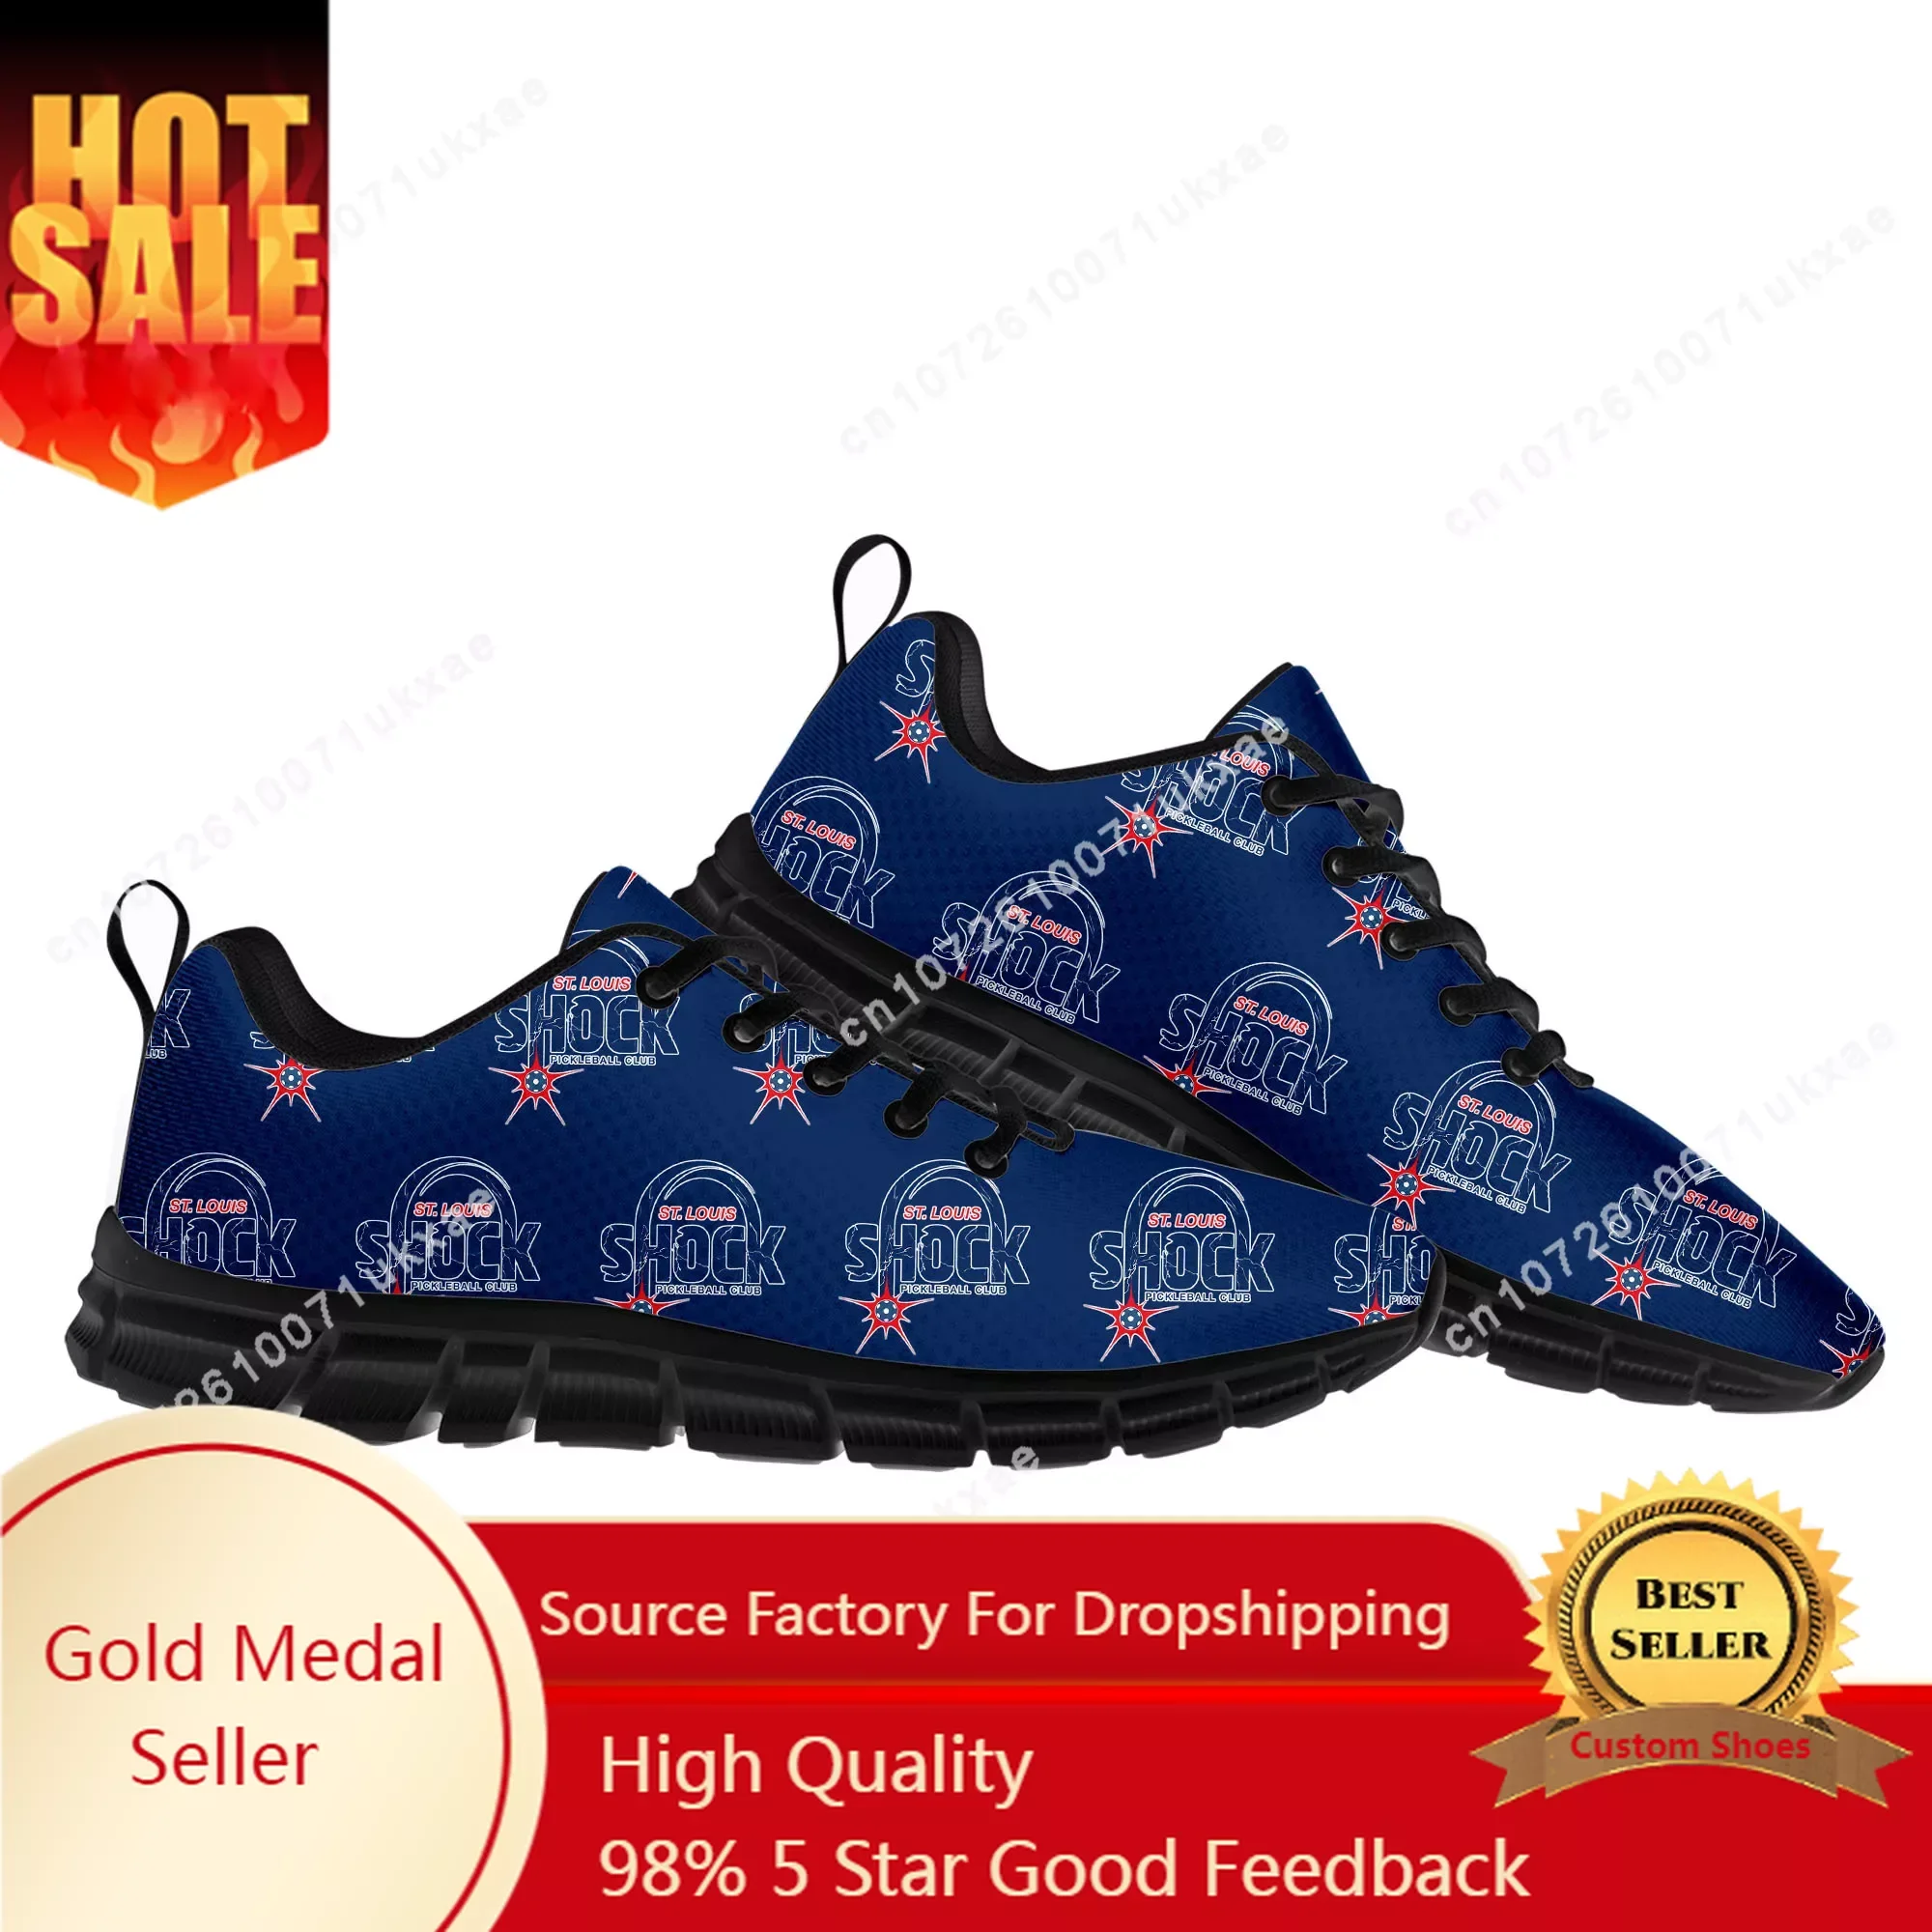 SHOCK pickleball Sports Shoes Mens Womens Teenager Kids Children Sneakers High Quality Parent Child Sneaker Customize DIY Shoe high quality boys basketball shoes non slip breathable top kids sneakers children sport shoes boy child trainer shoe boots 2021